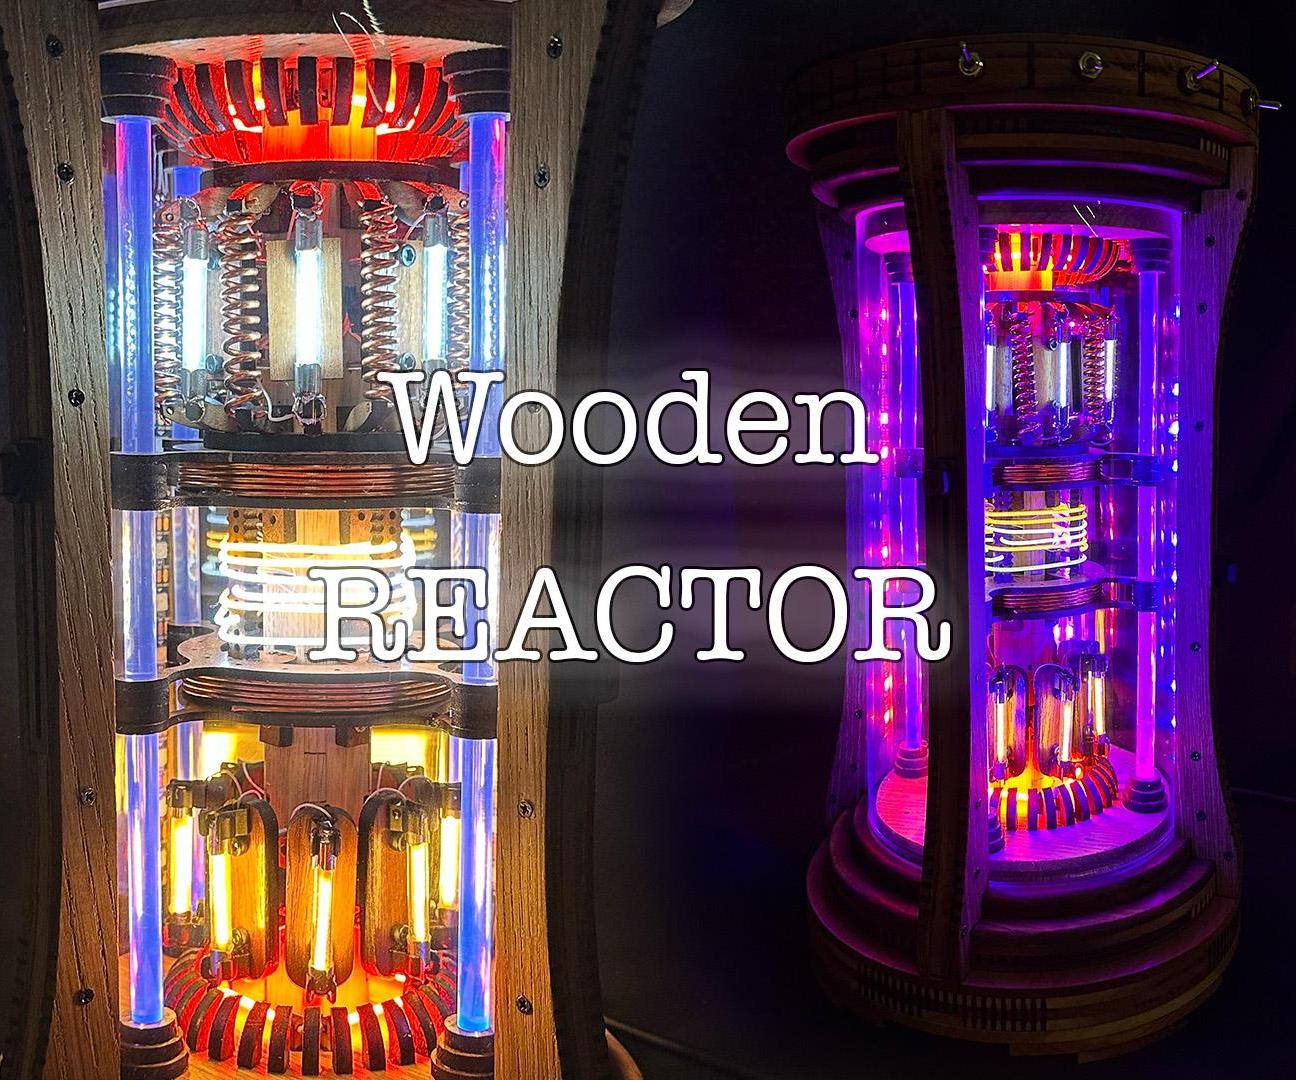 Wooden Reactor Simulator: Nightlight, Desk Lamp, Sound Simulation and Dynamic Lighting Effects, Wireless Charger, USB Quick Charger, WiFi Controlled